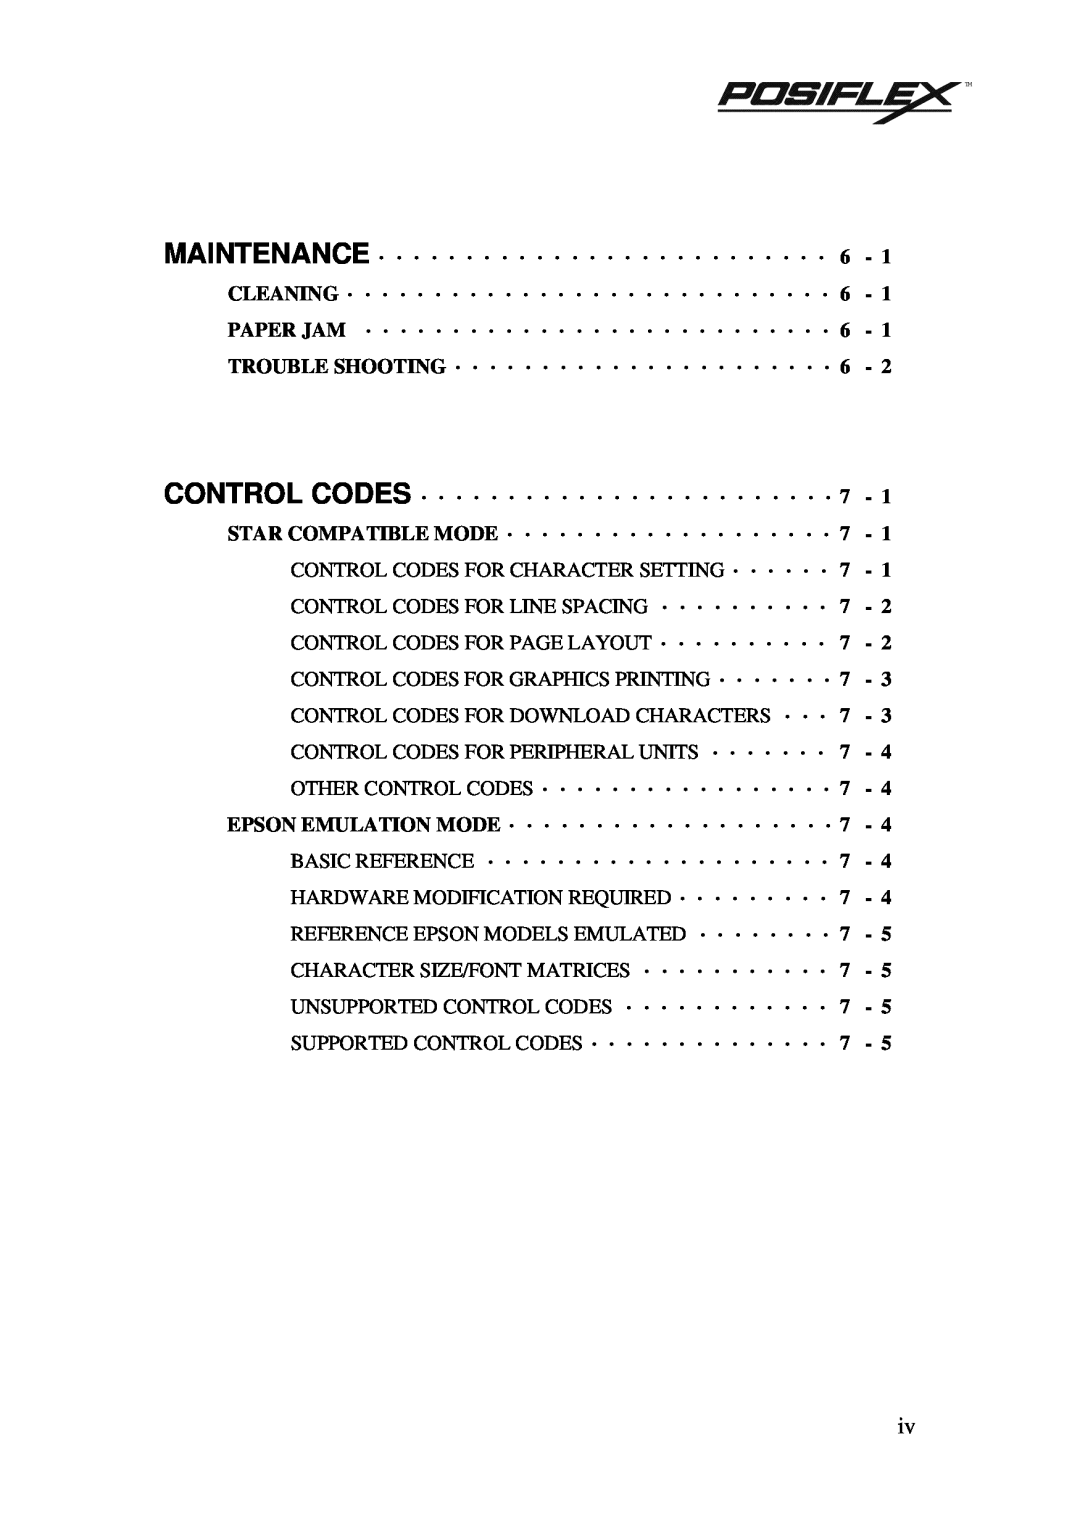 POSIFLEX Business Machines PP3000 manual CONTROL CODES FOR DOWNLOAD CHARACTERS · · · 7 